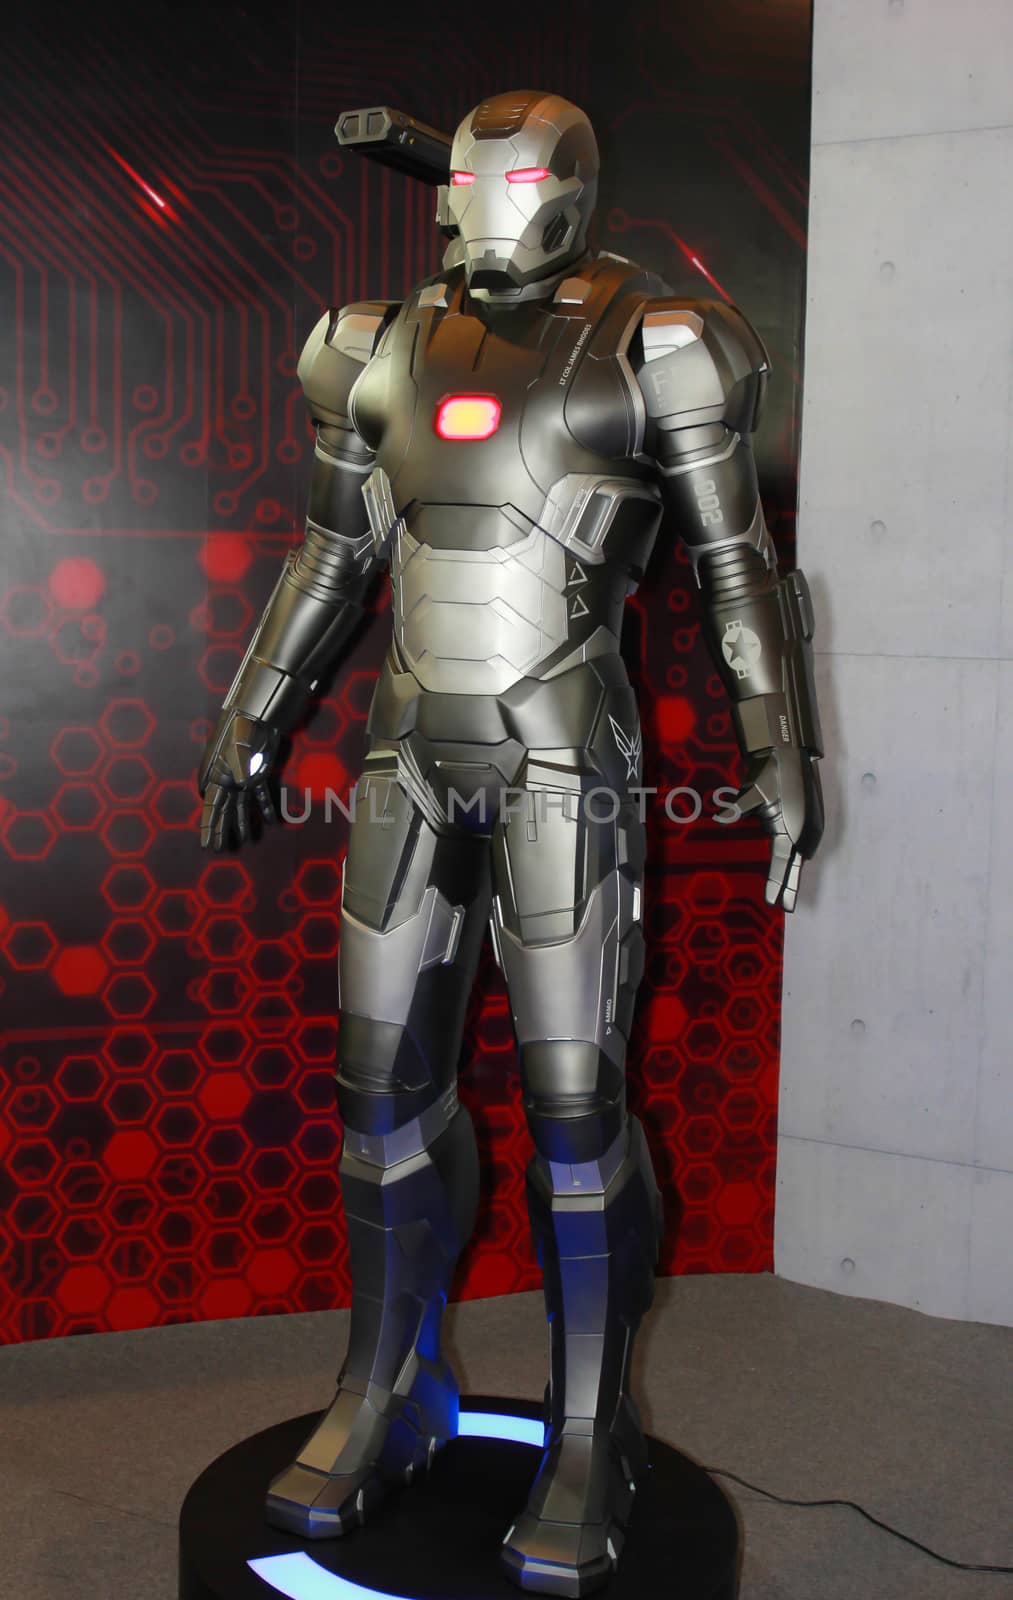 A model of the character Iron Man from the movies and comics 13 by redthirteen